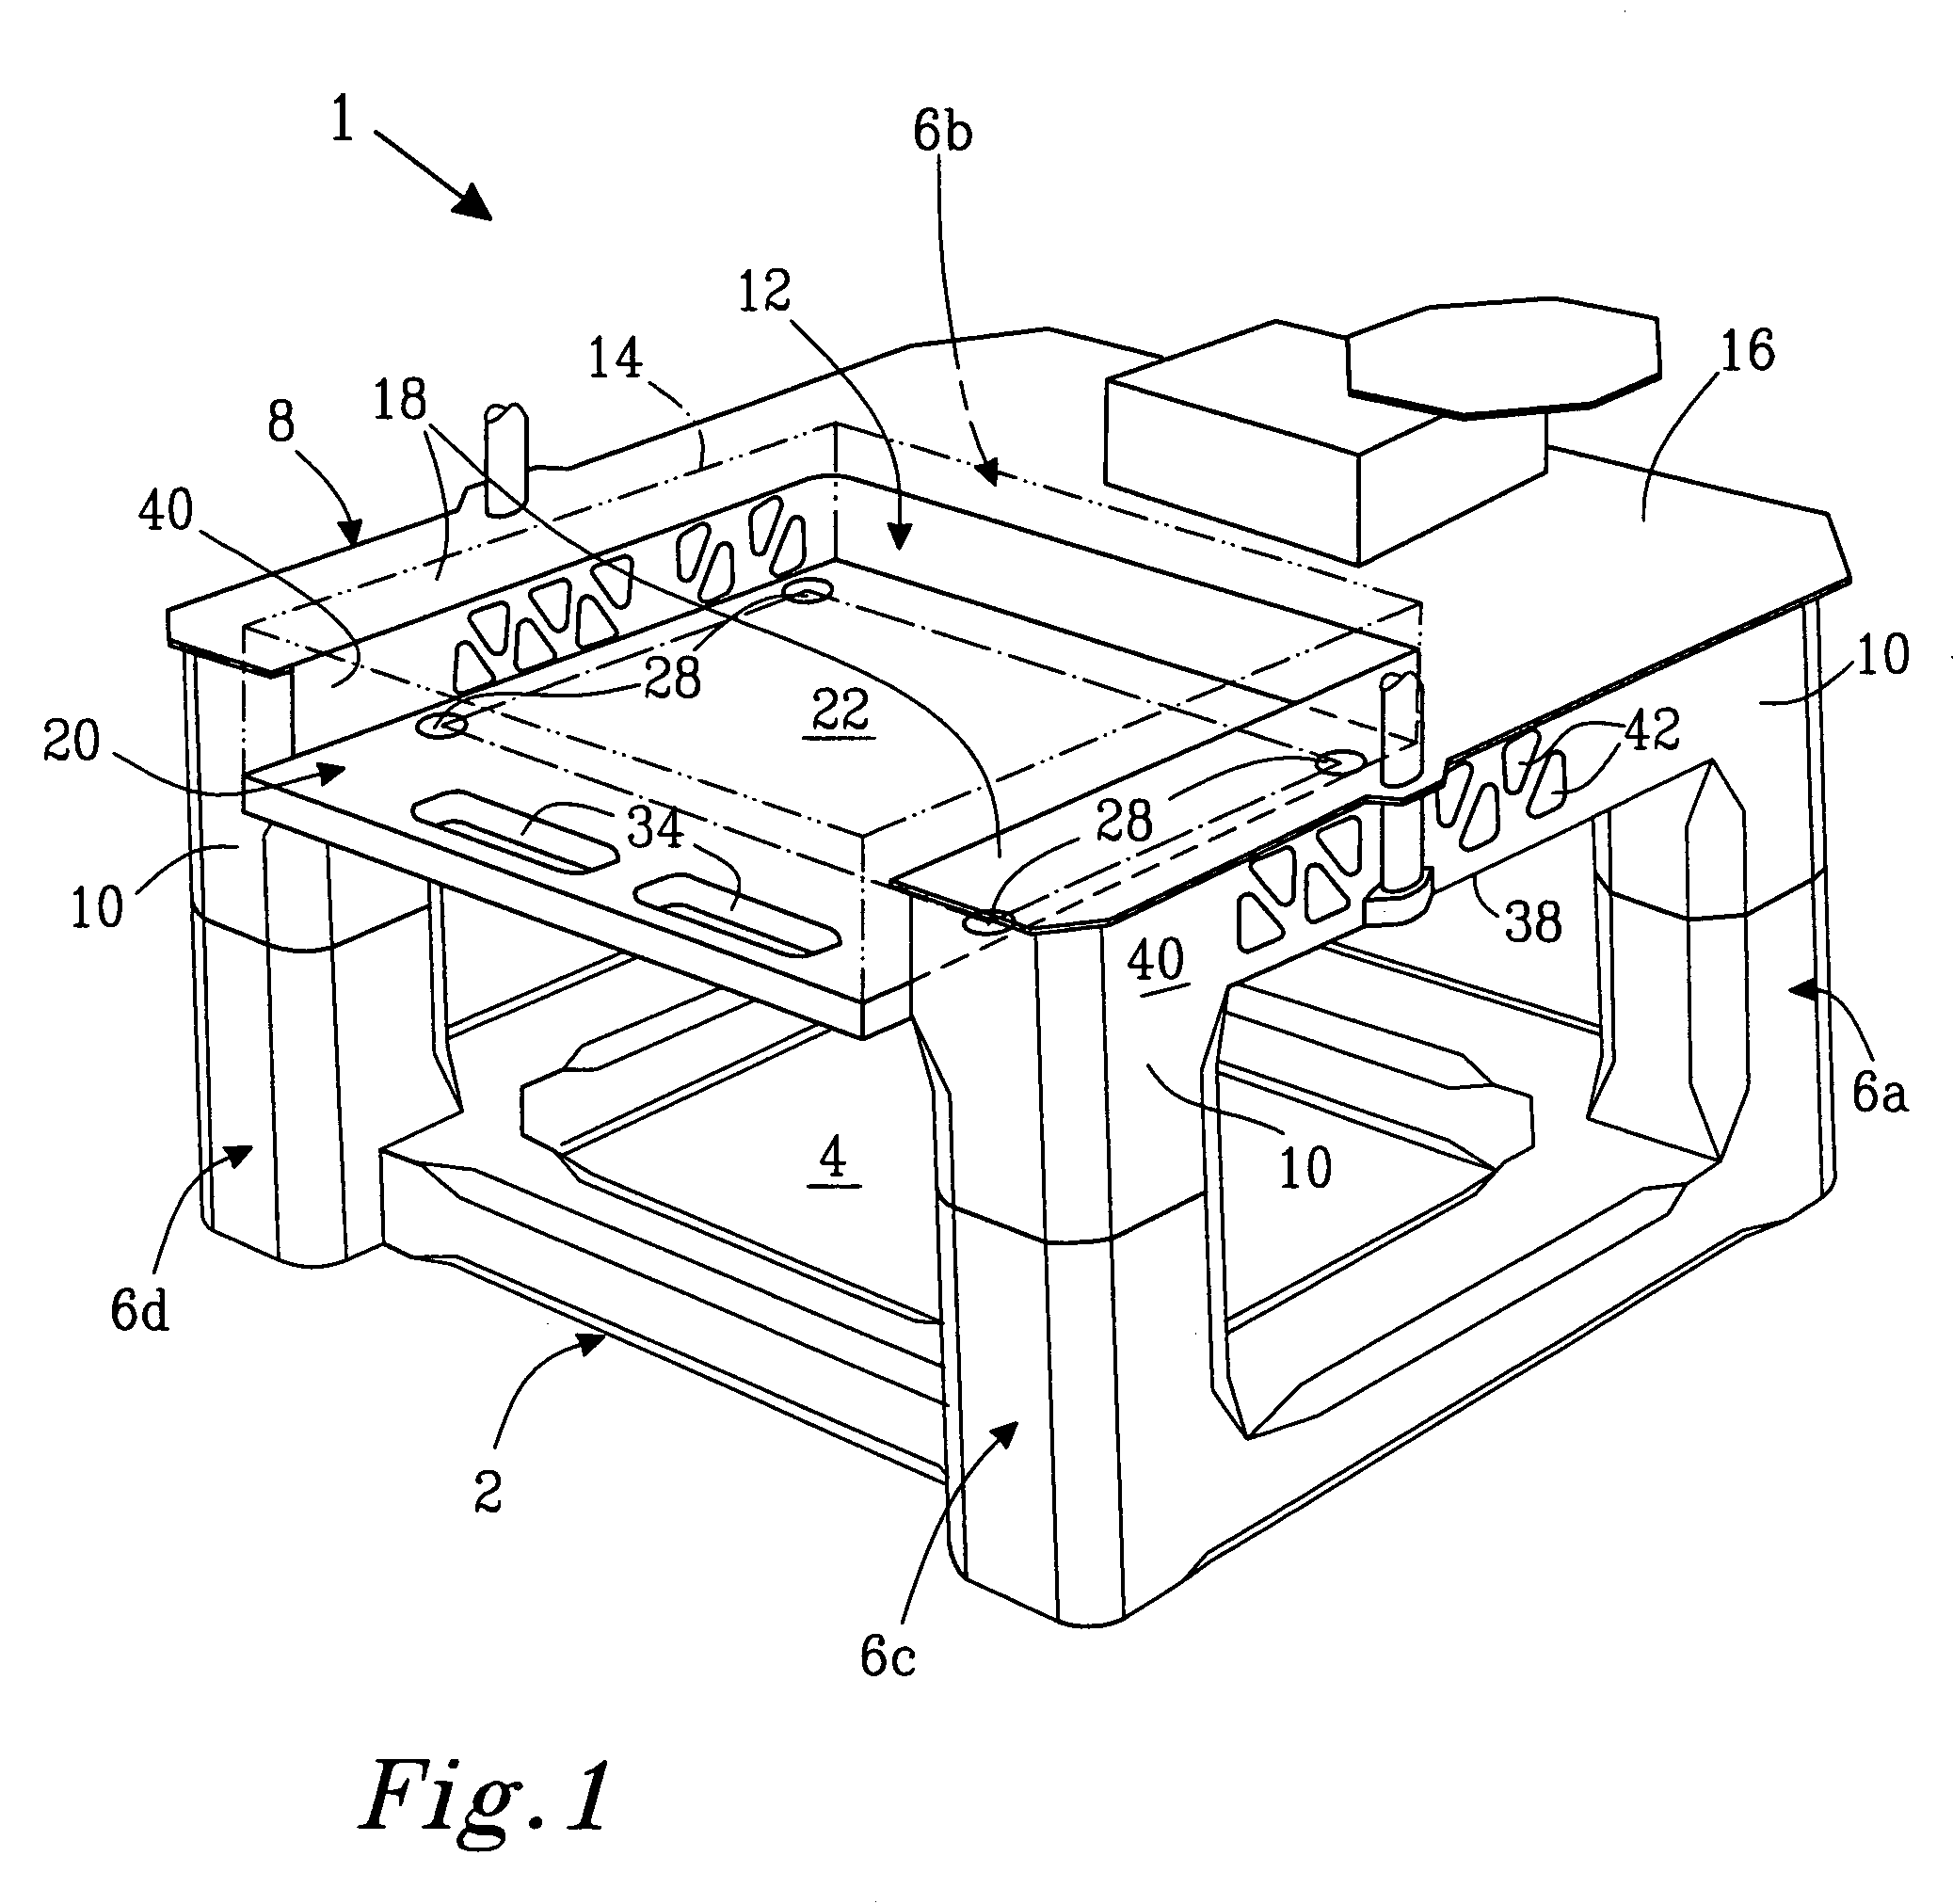 Semi-submersible offshore vessel and methods for positioning operation modules on said vessel